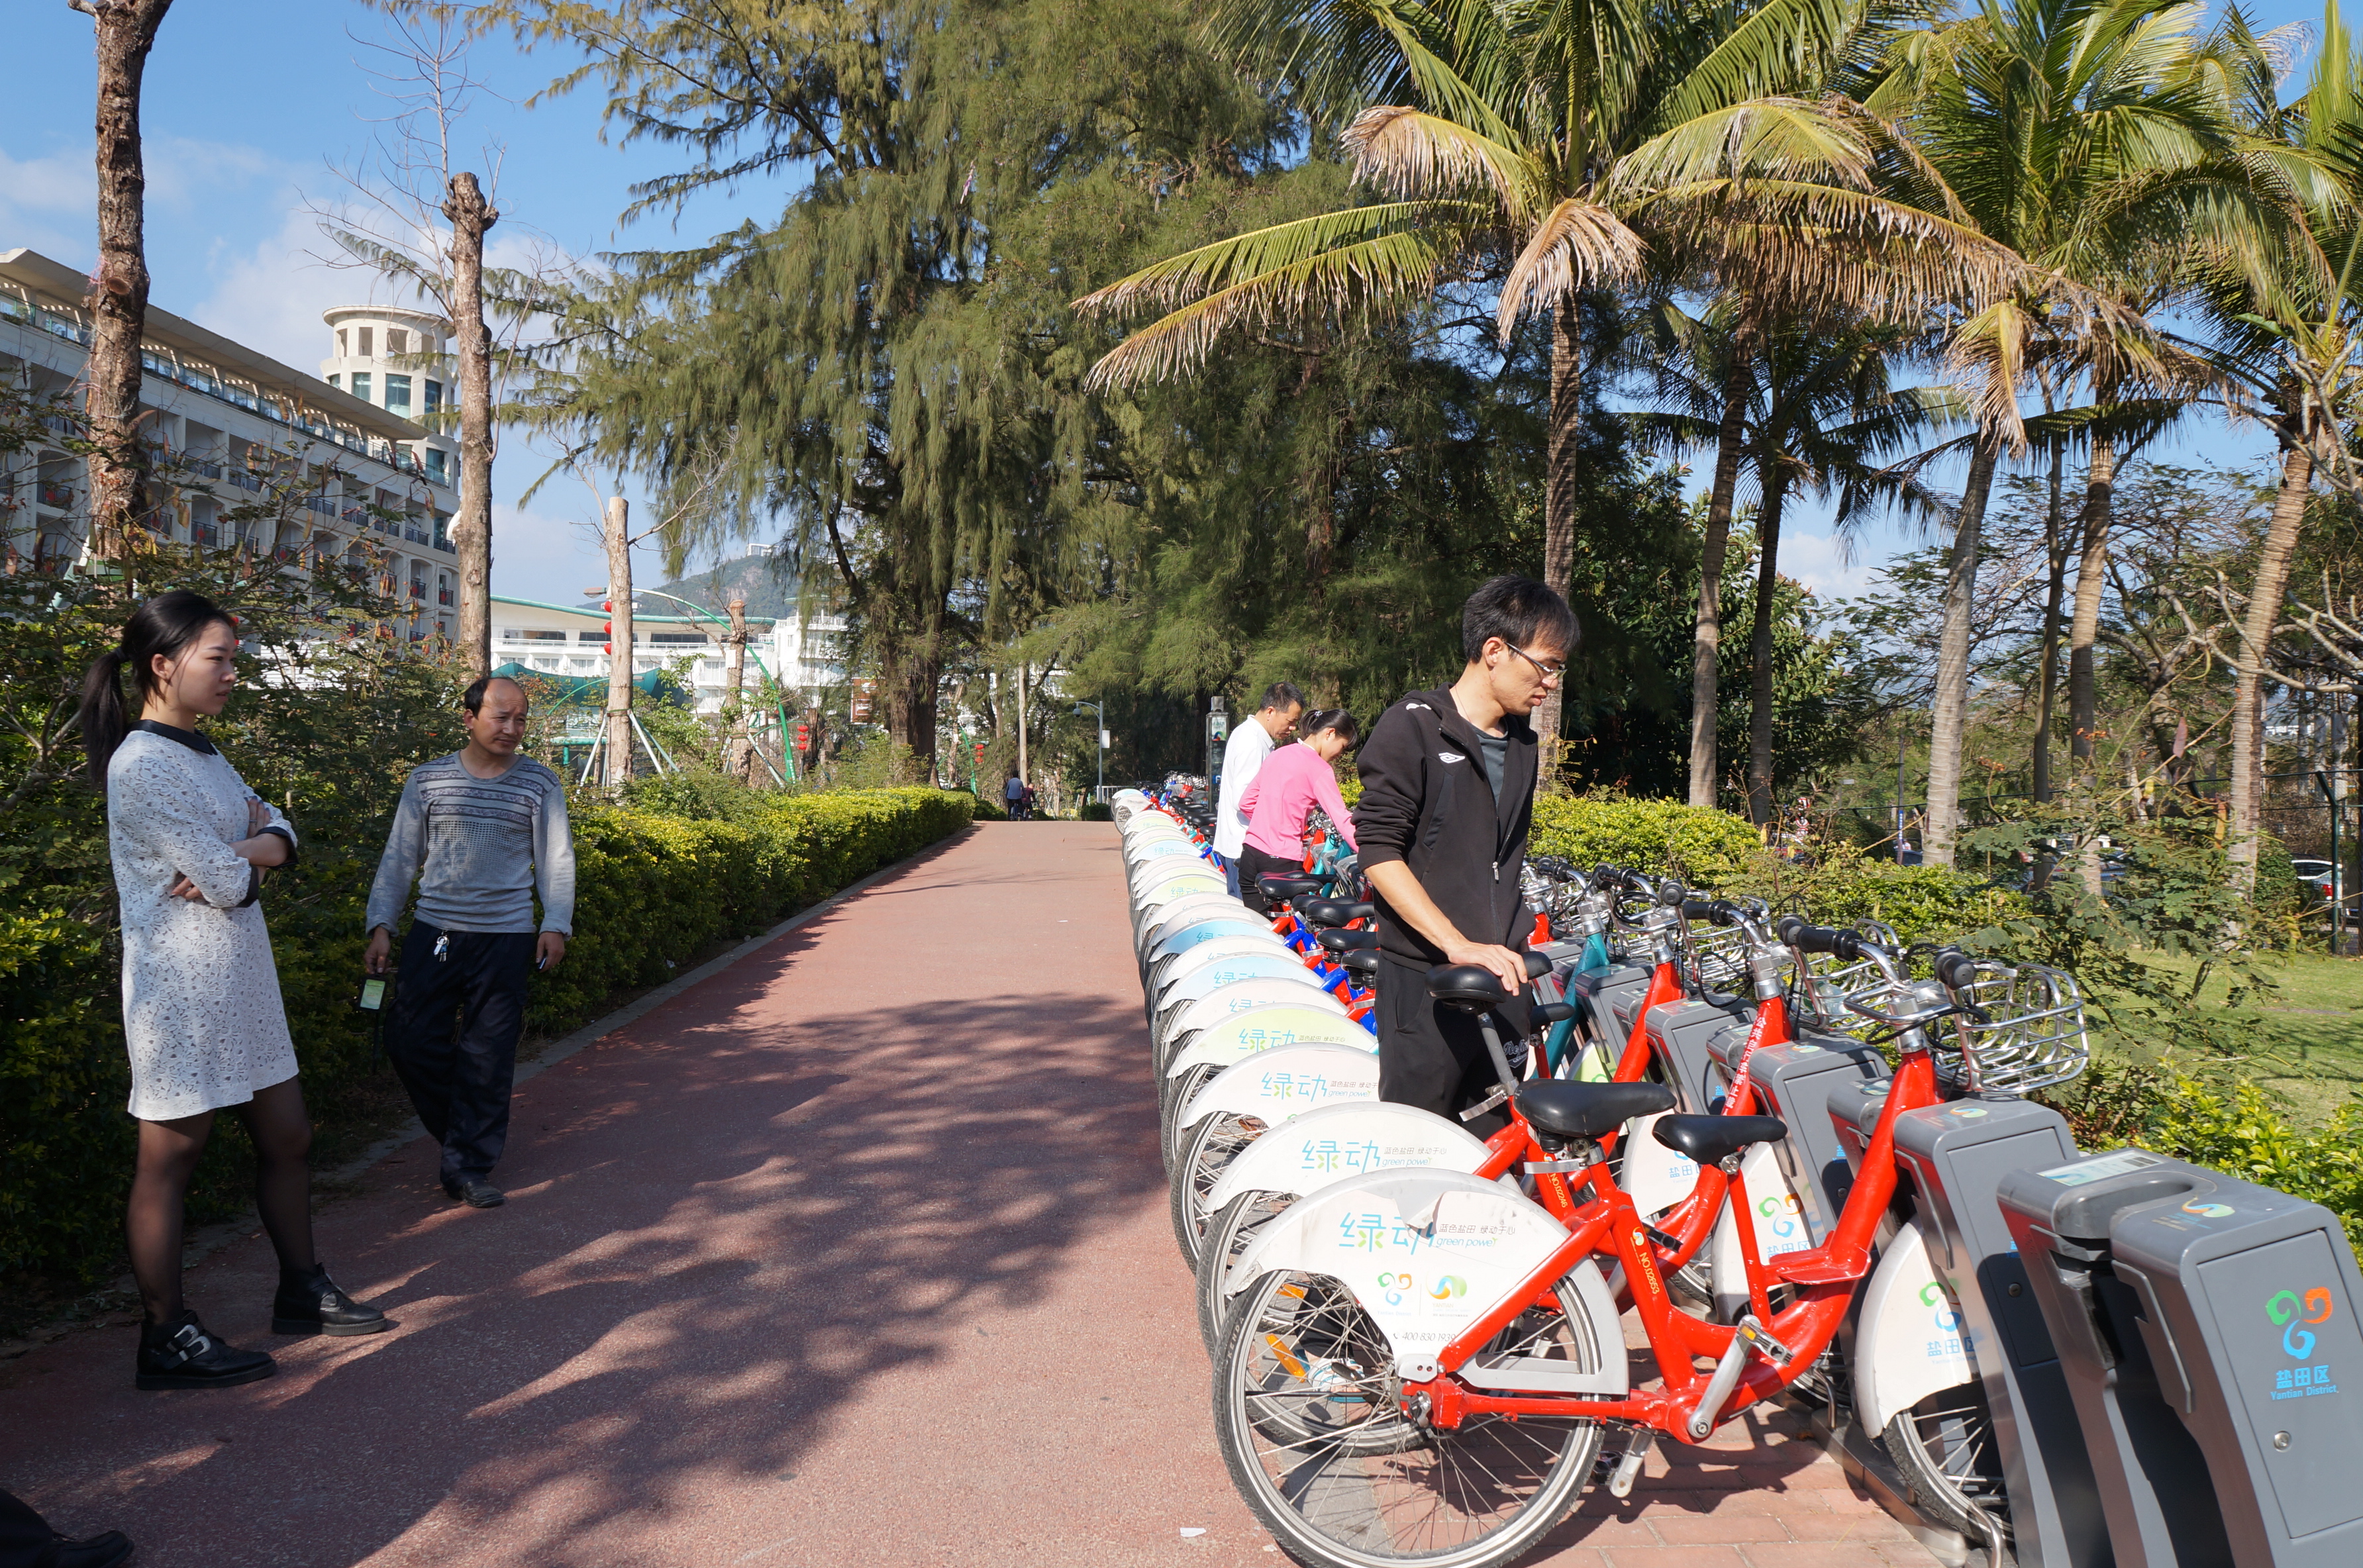 The most successful systems have over 5000 bicycles, like at this docking point in Shenzhen, China. 